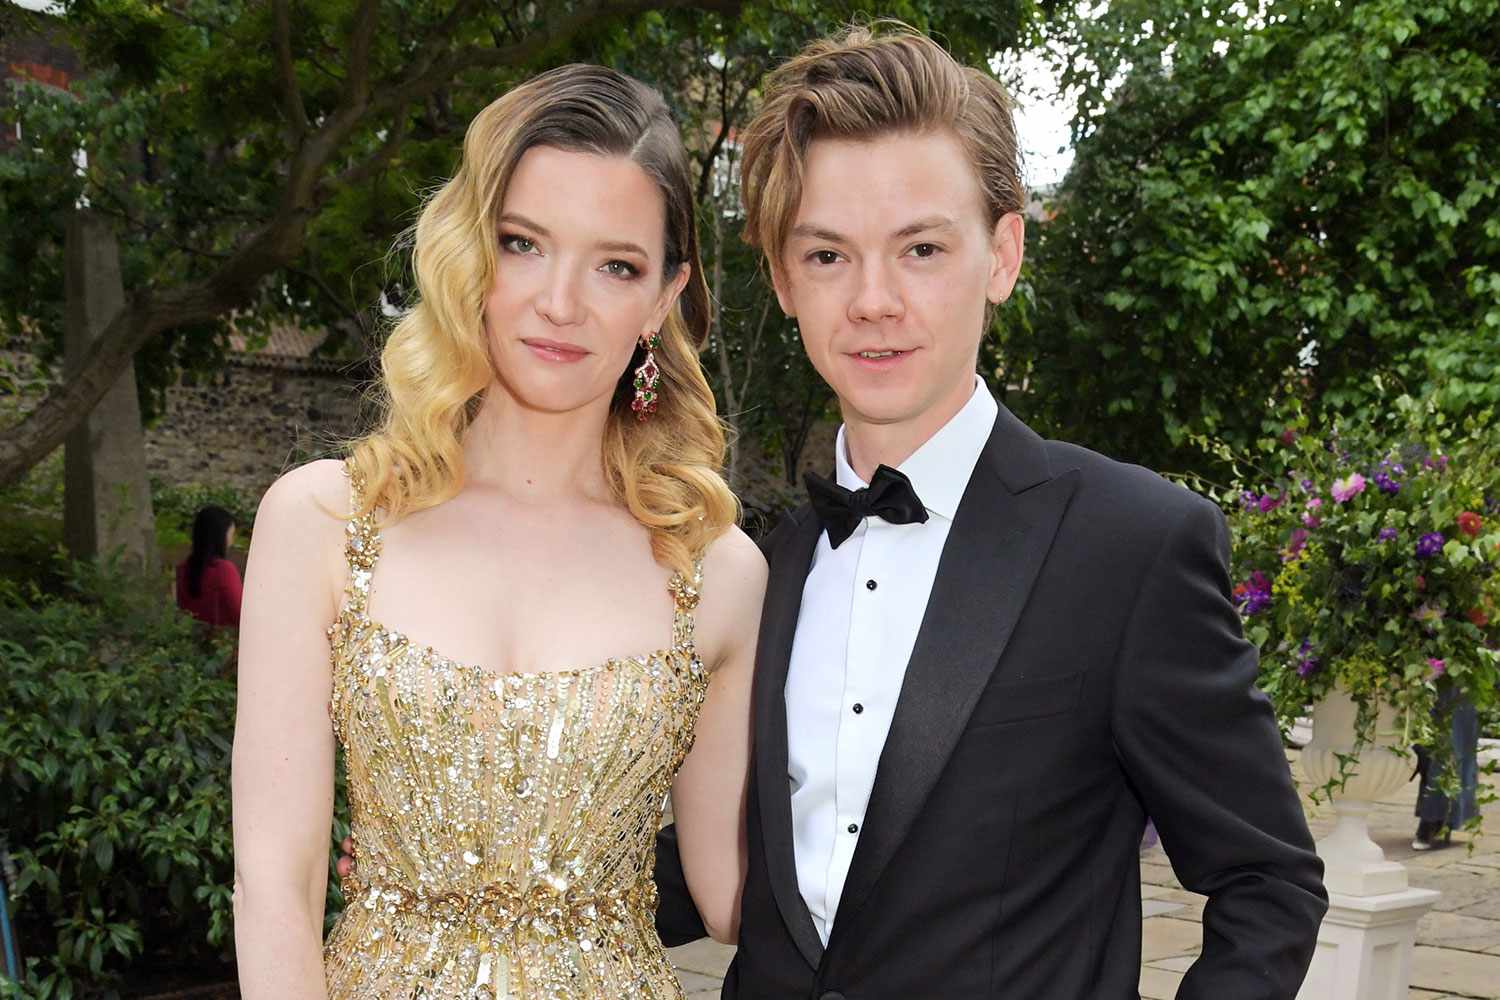 ‘Love Actually’ star Thomas Brodie-Sangster engaged to Talulah Riley